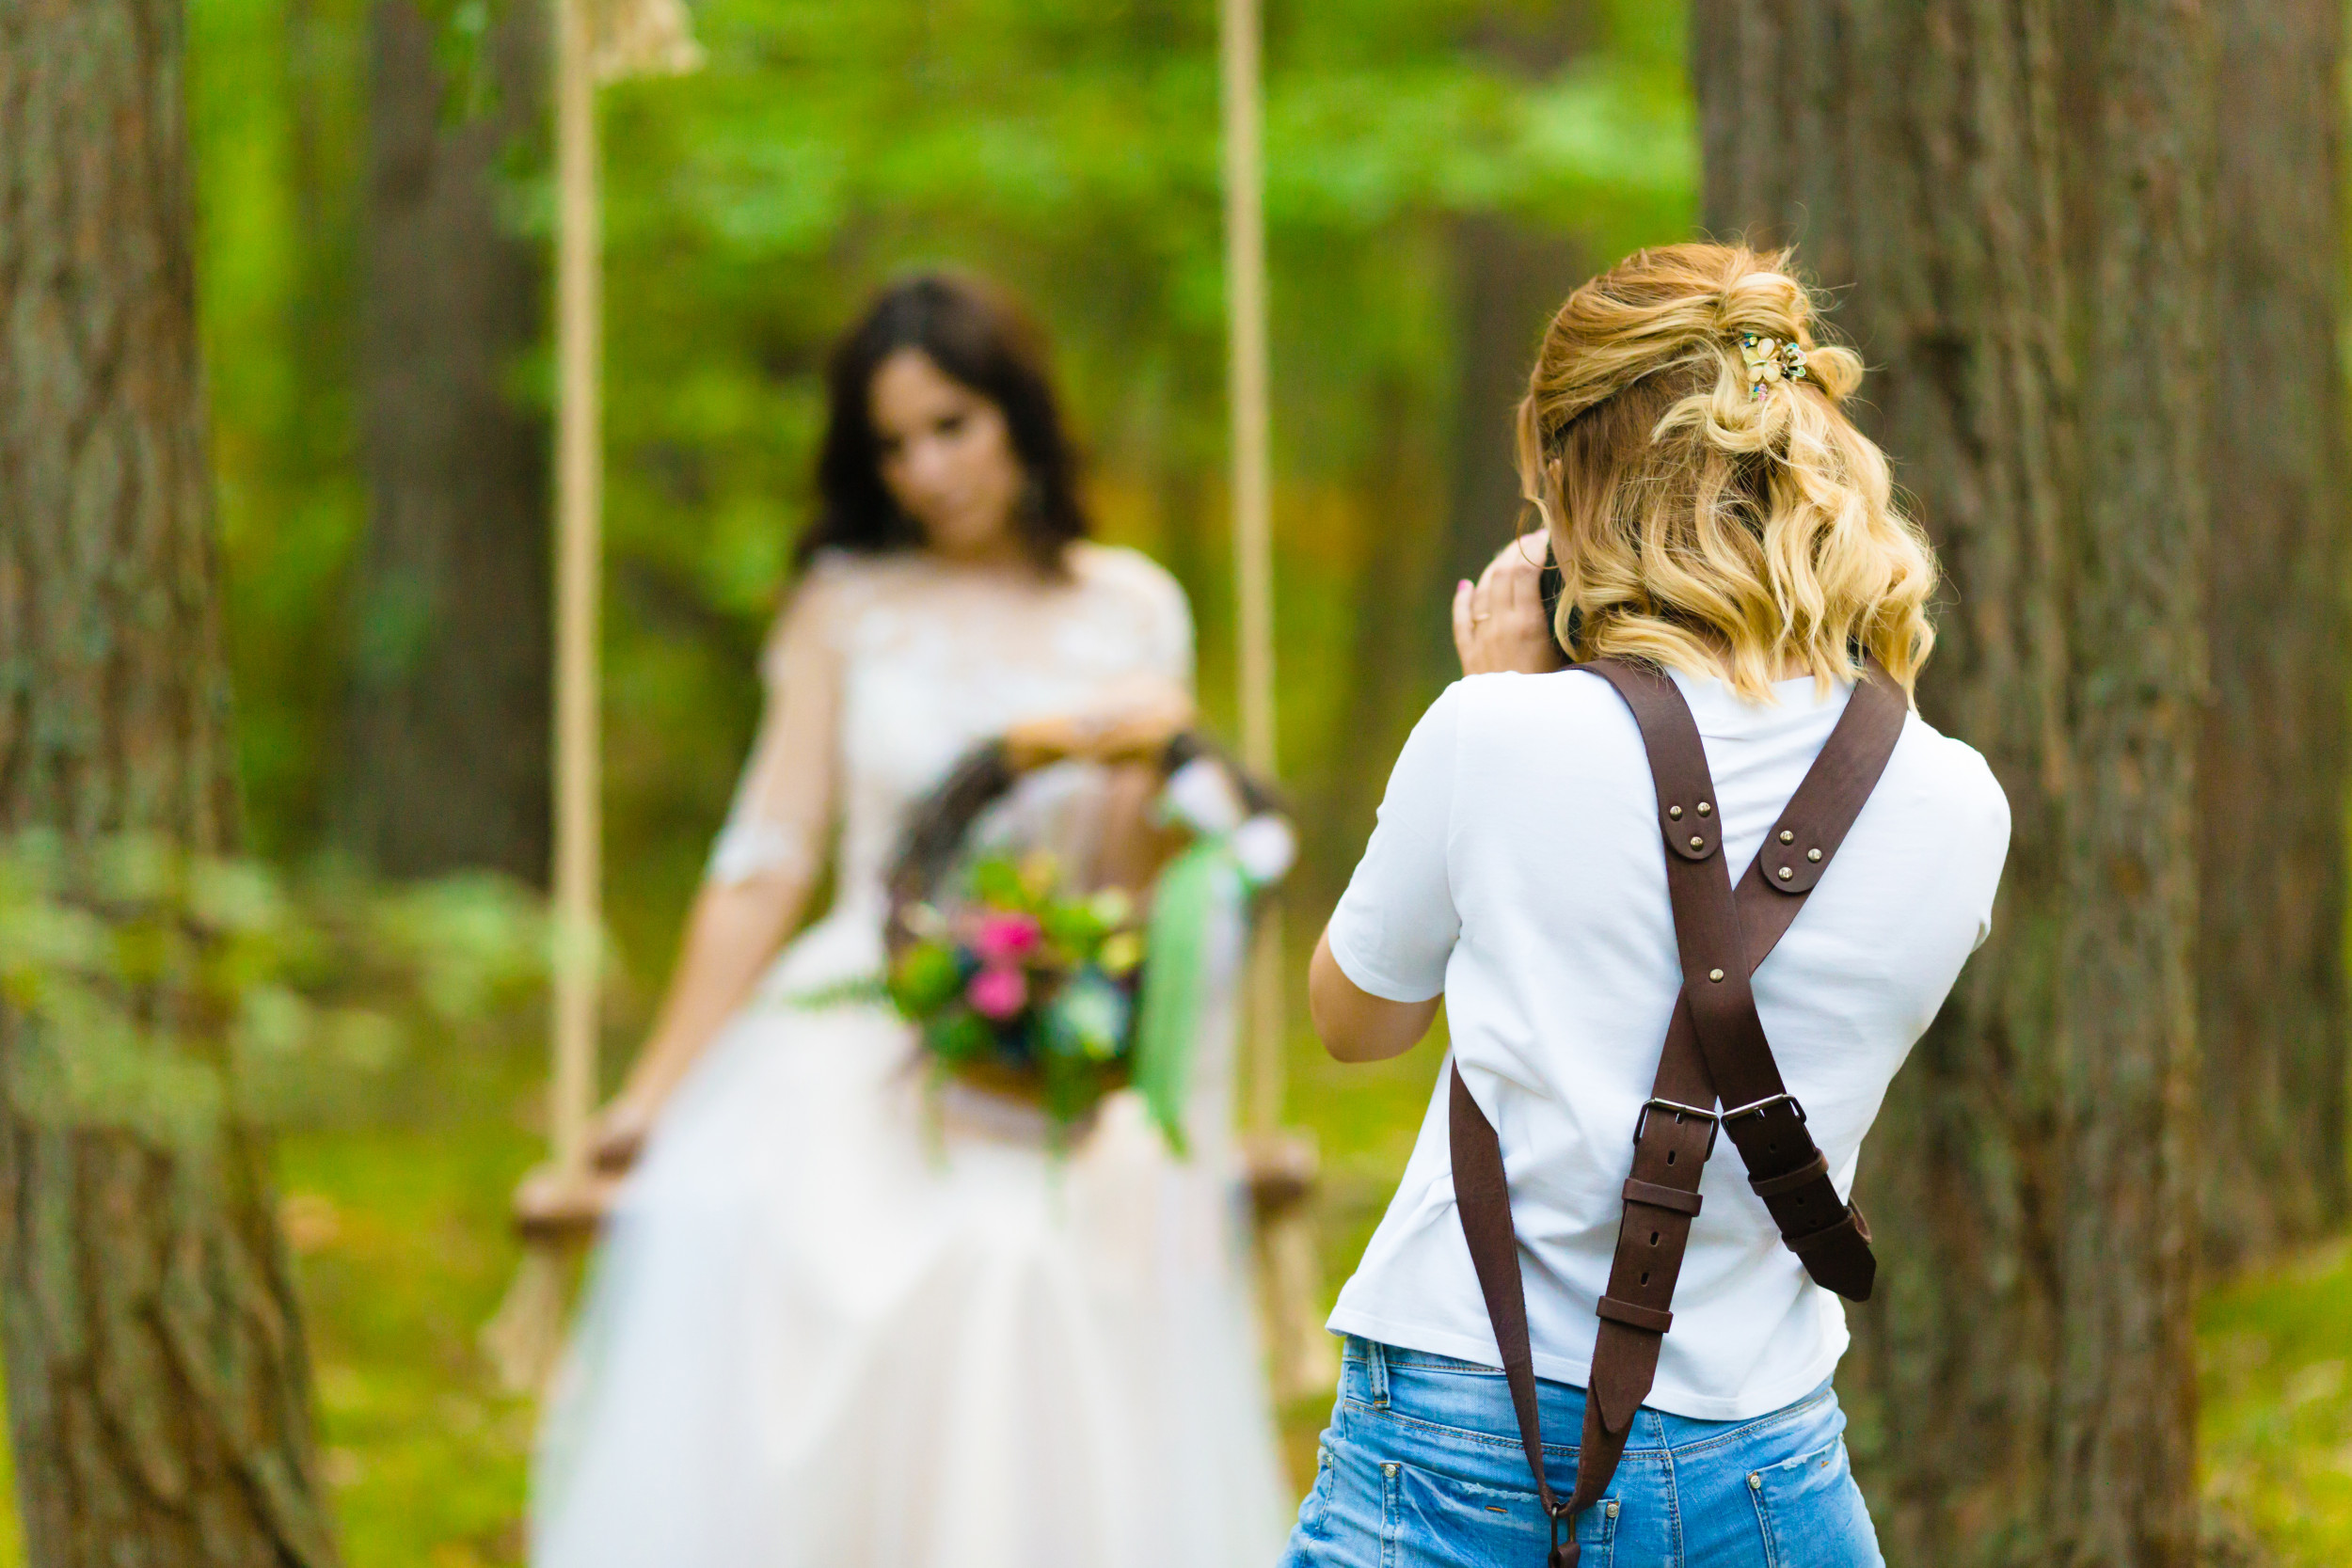 Photographer Applauded For Canceling Her Services Night Before The Wedding